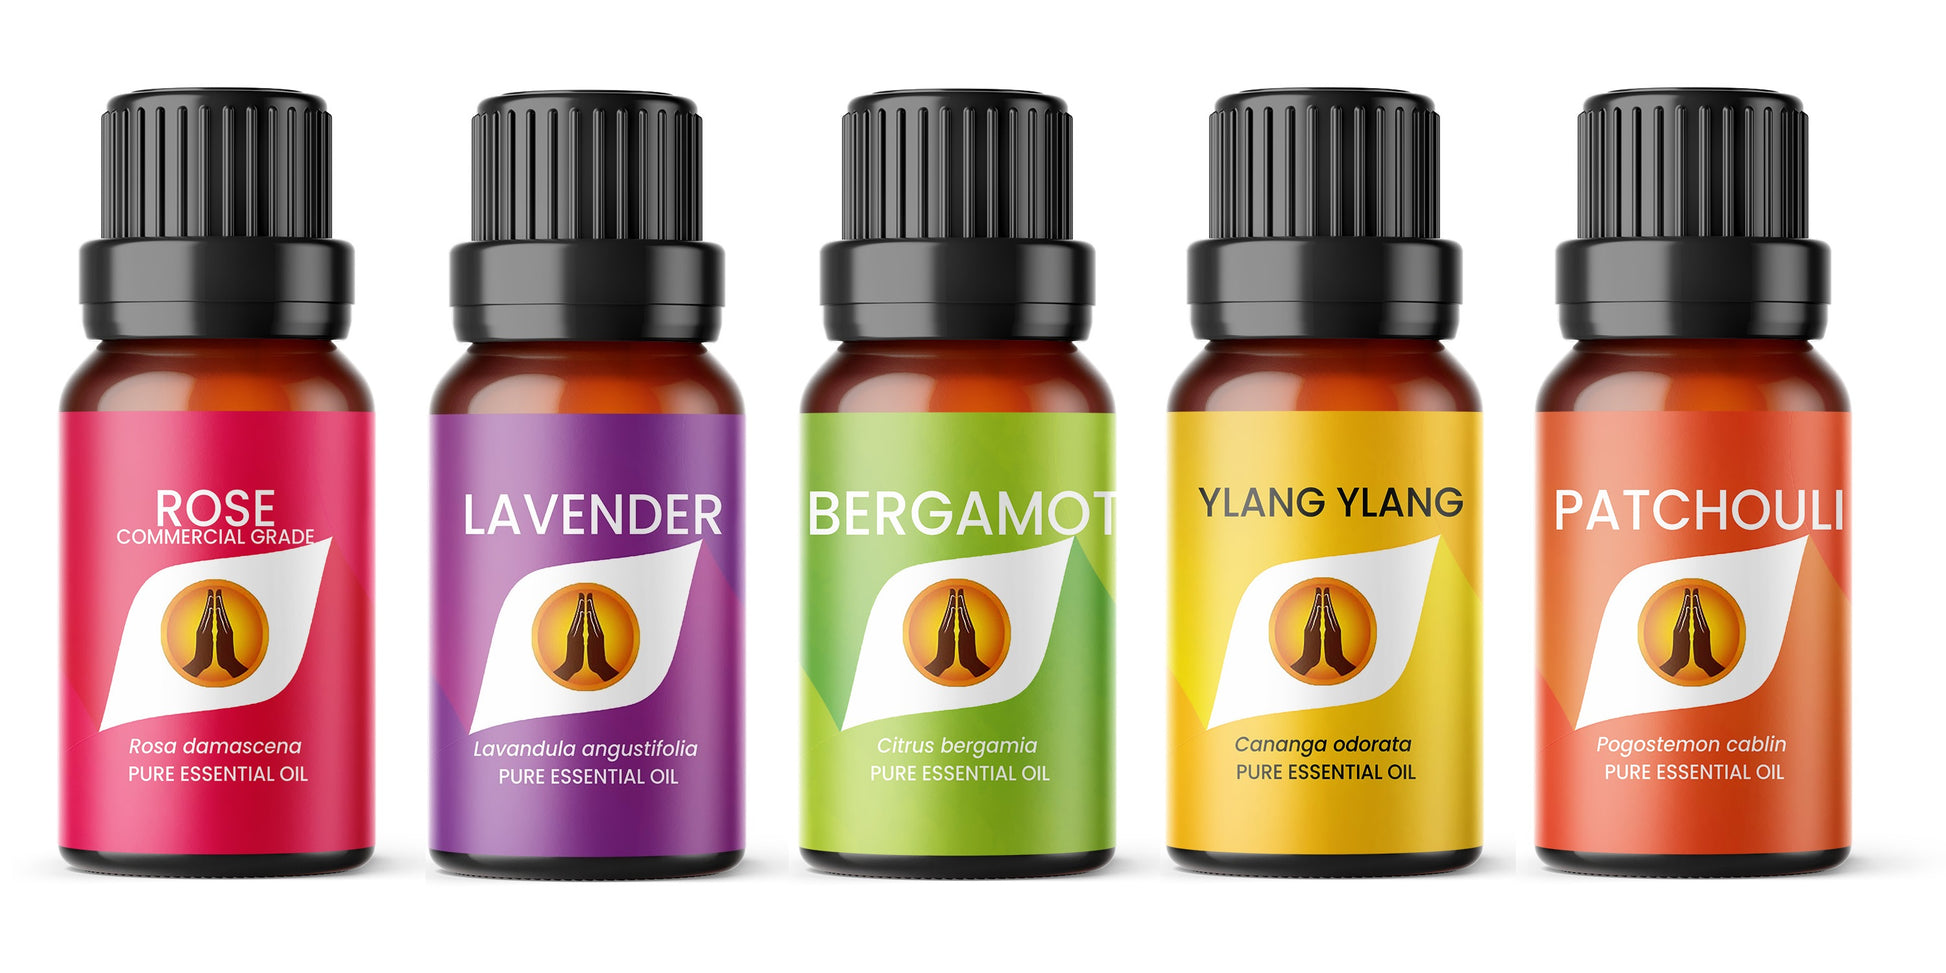 Anxiety Essential Oil Set - Aroma Energy